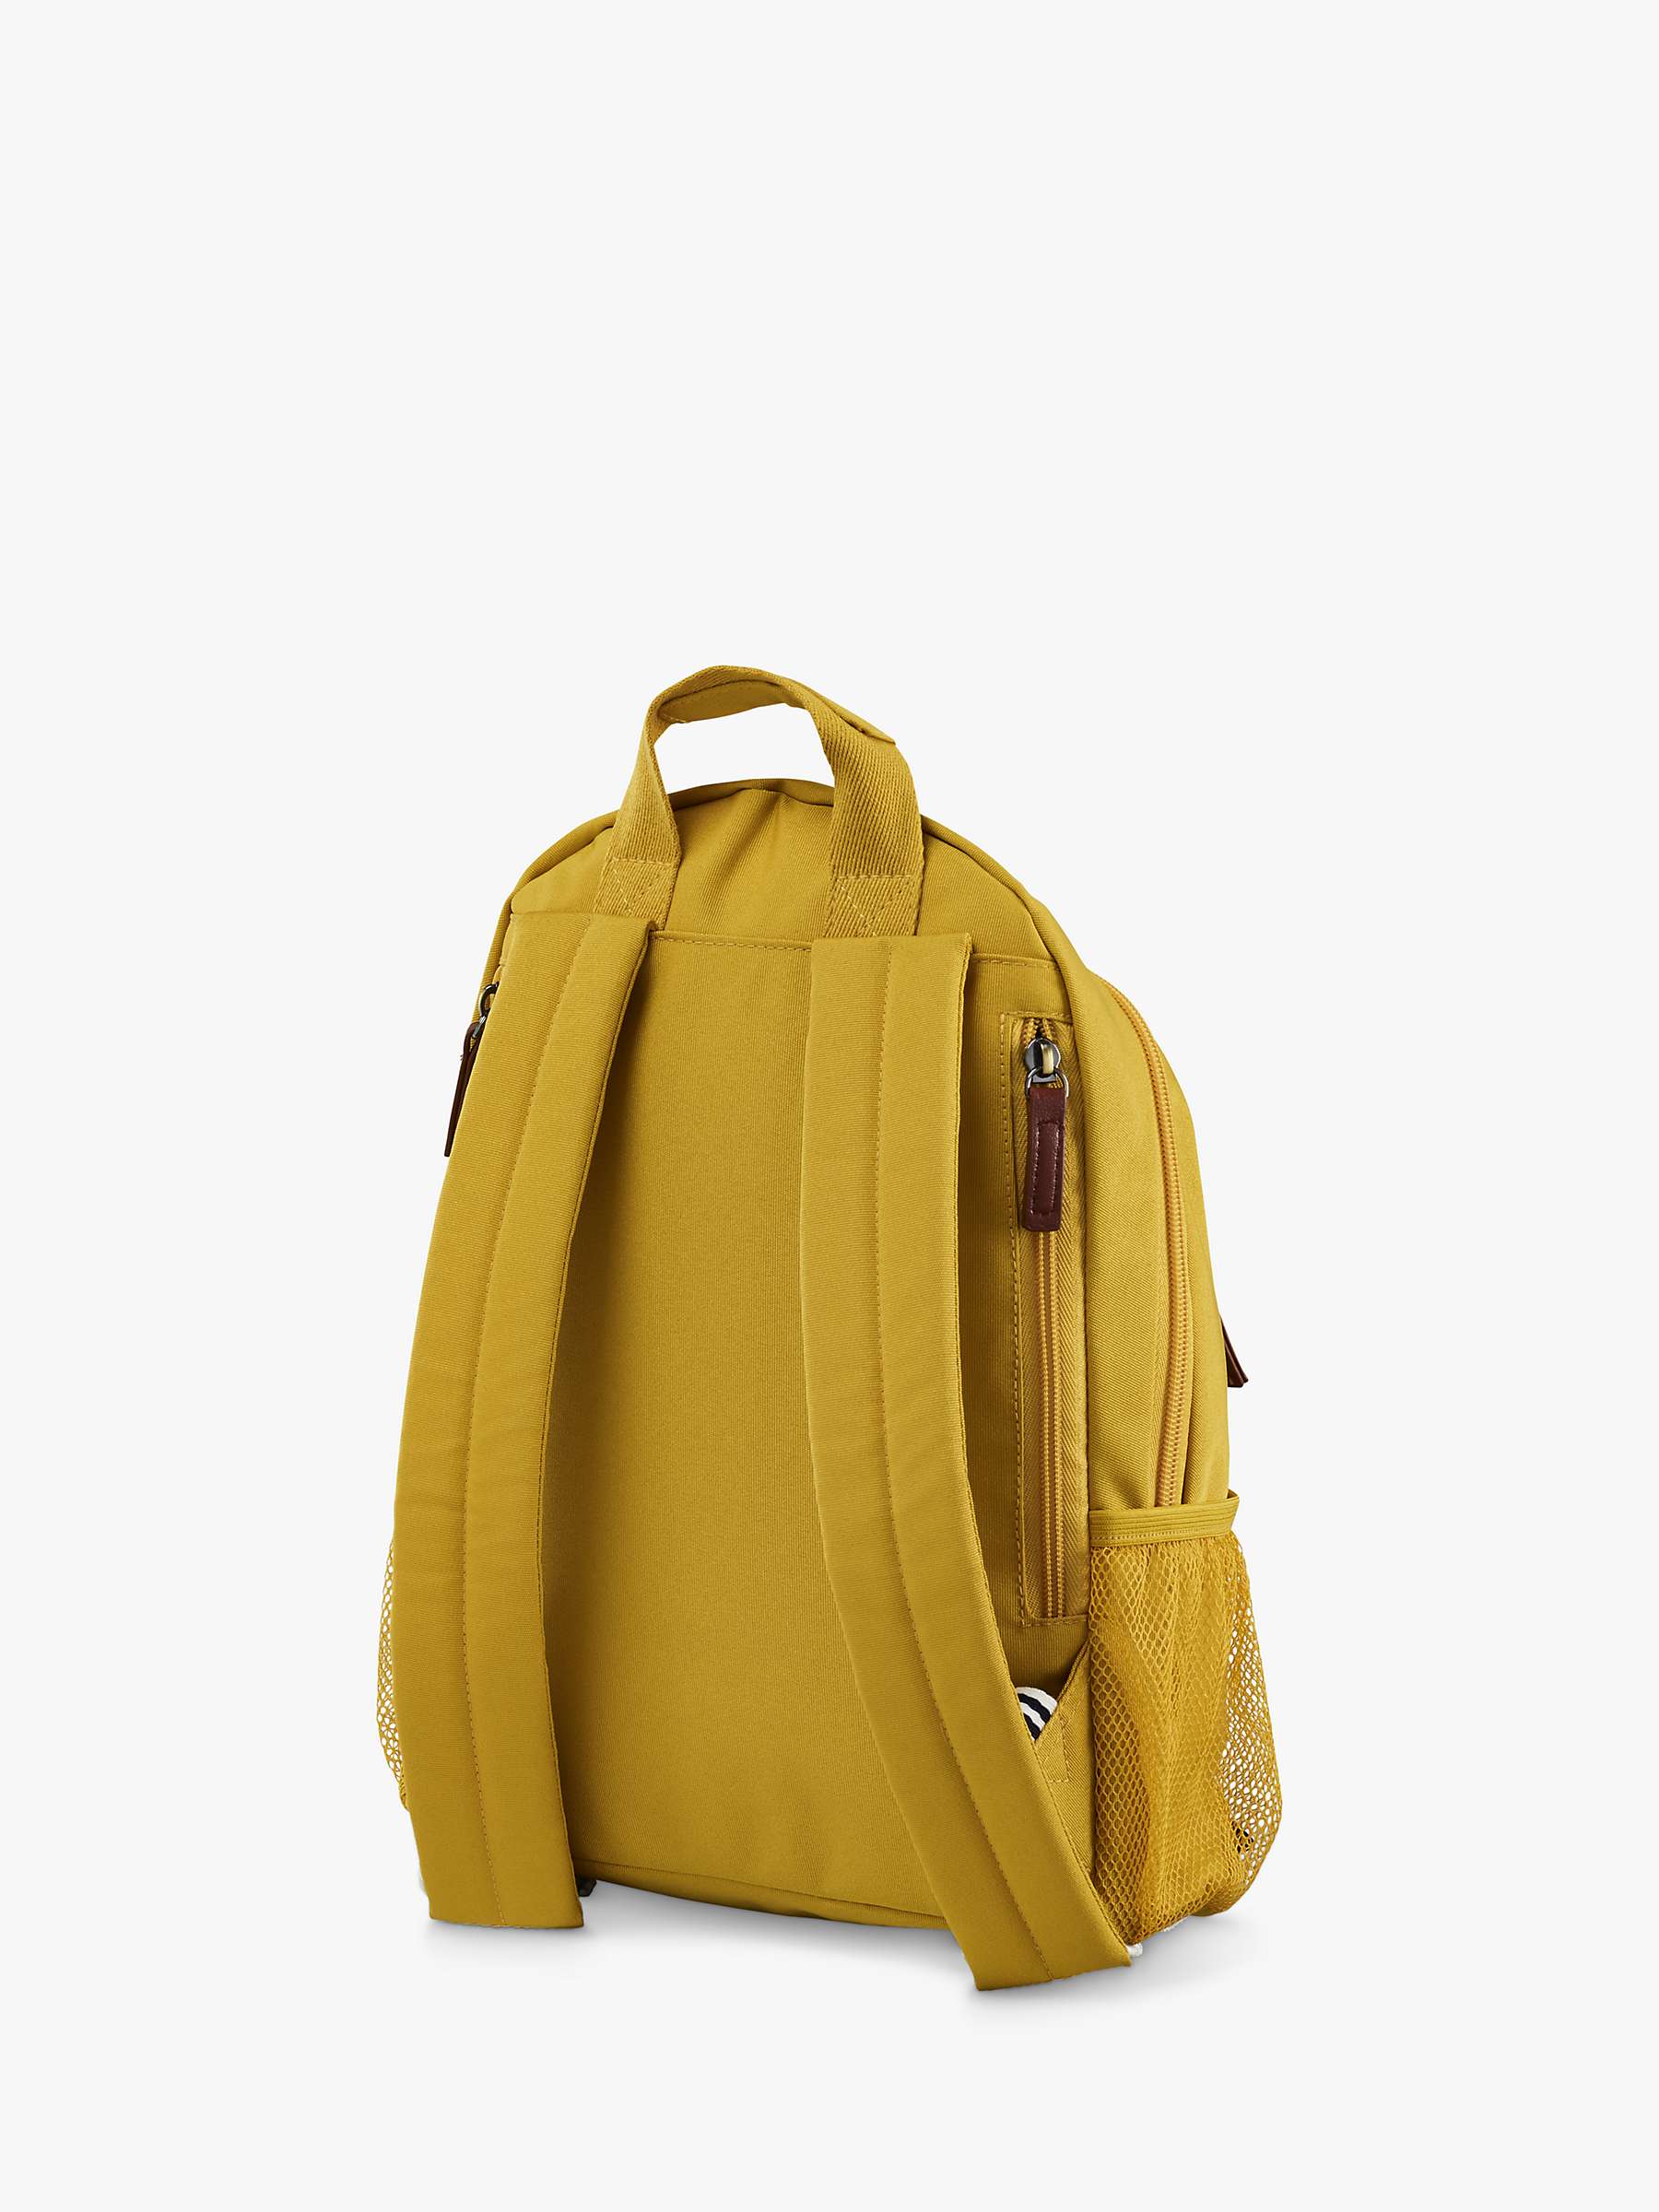 Buy Joules Coast Collection Small Backpack Online at johnlewis.com